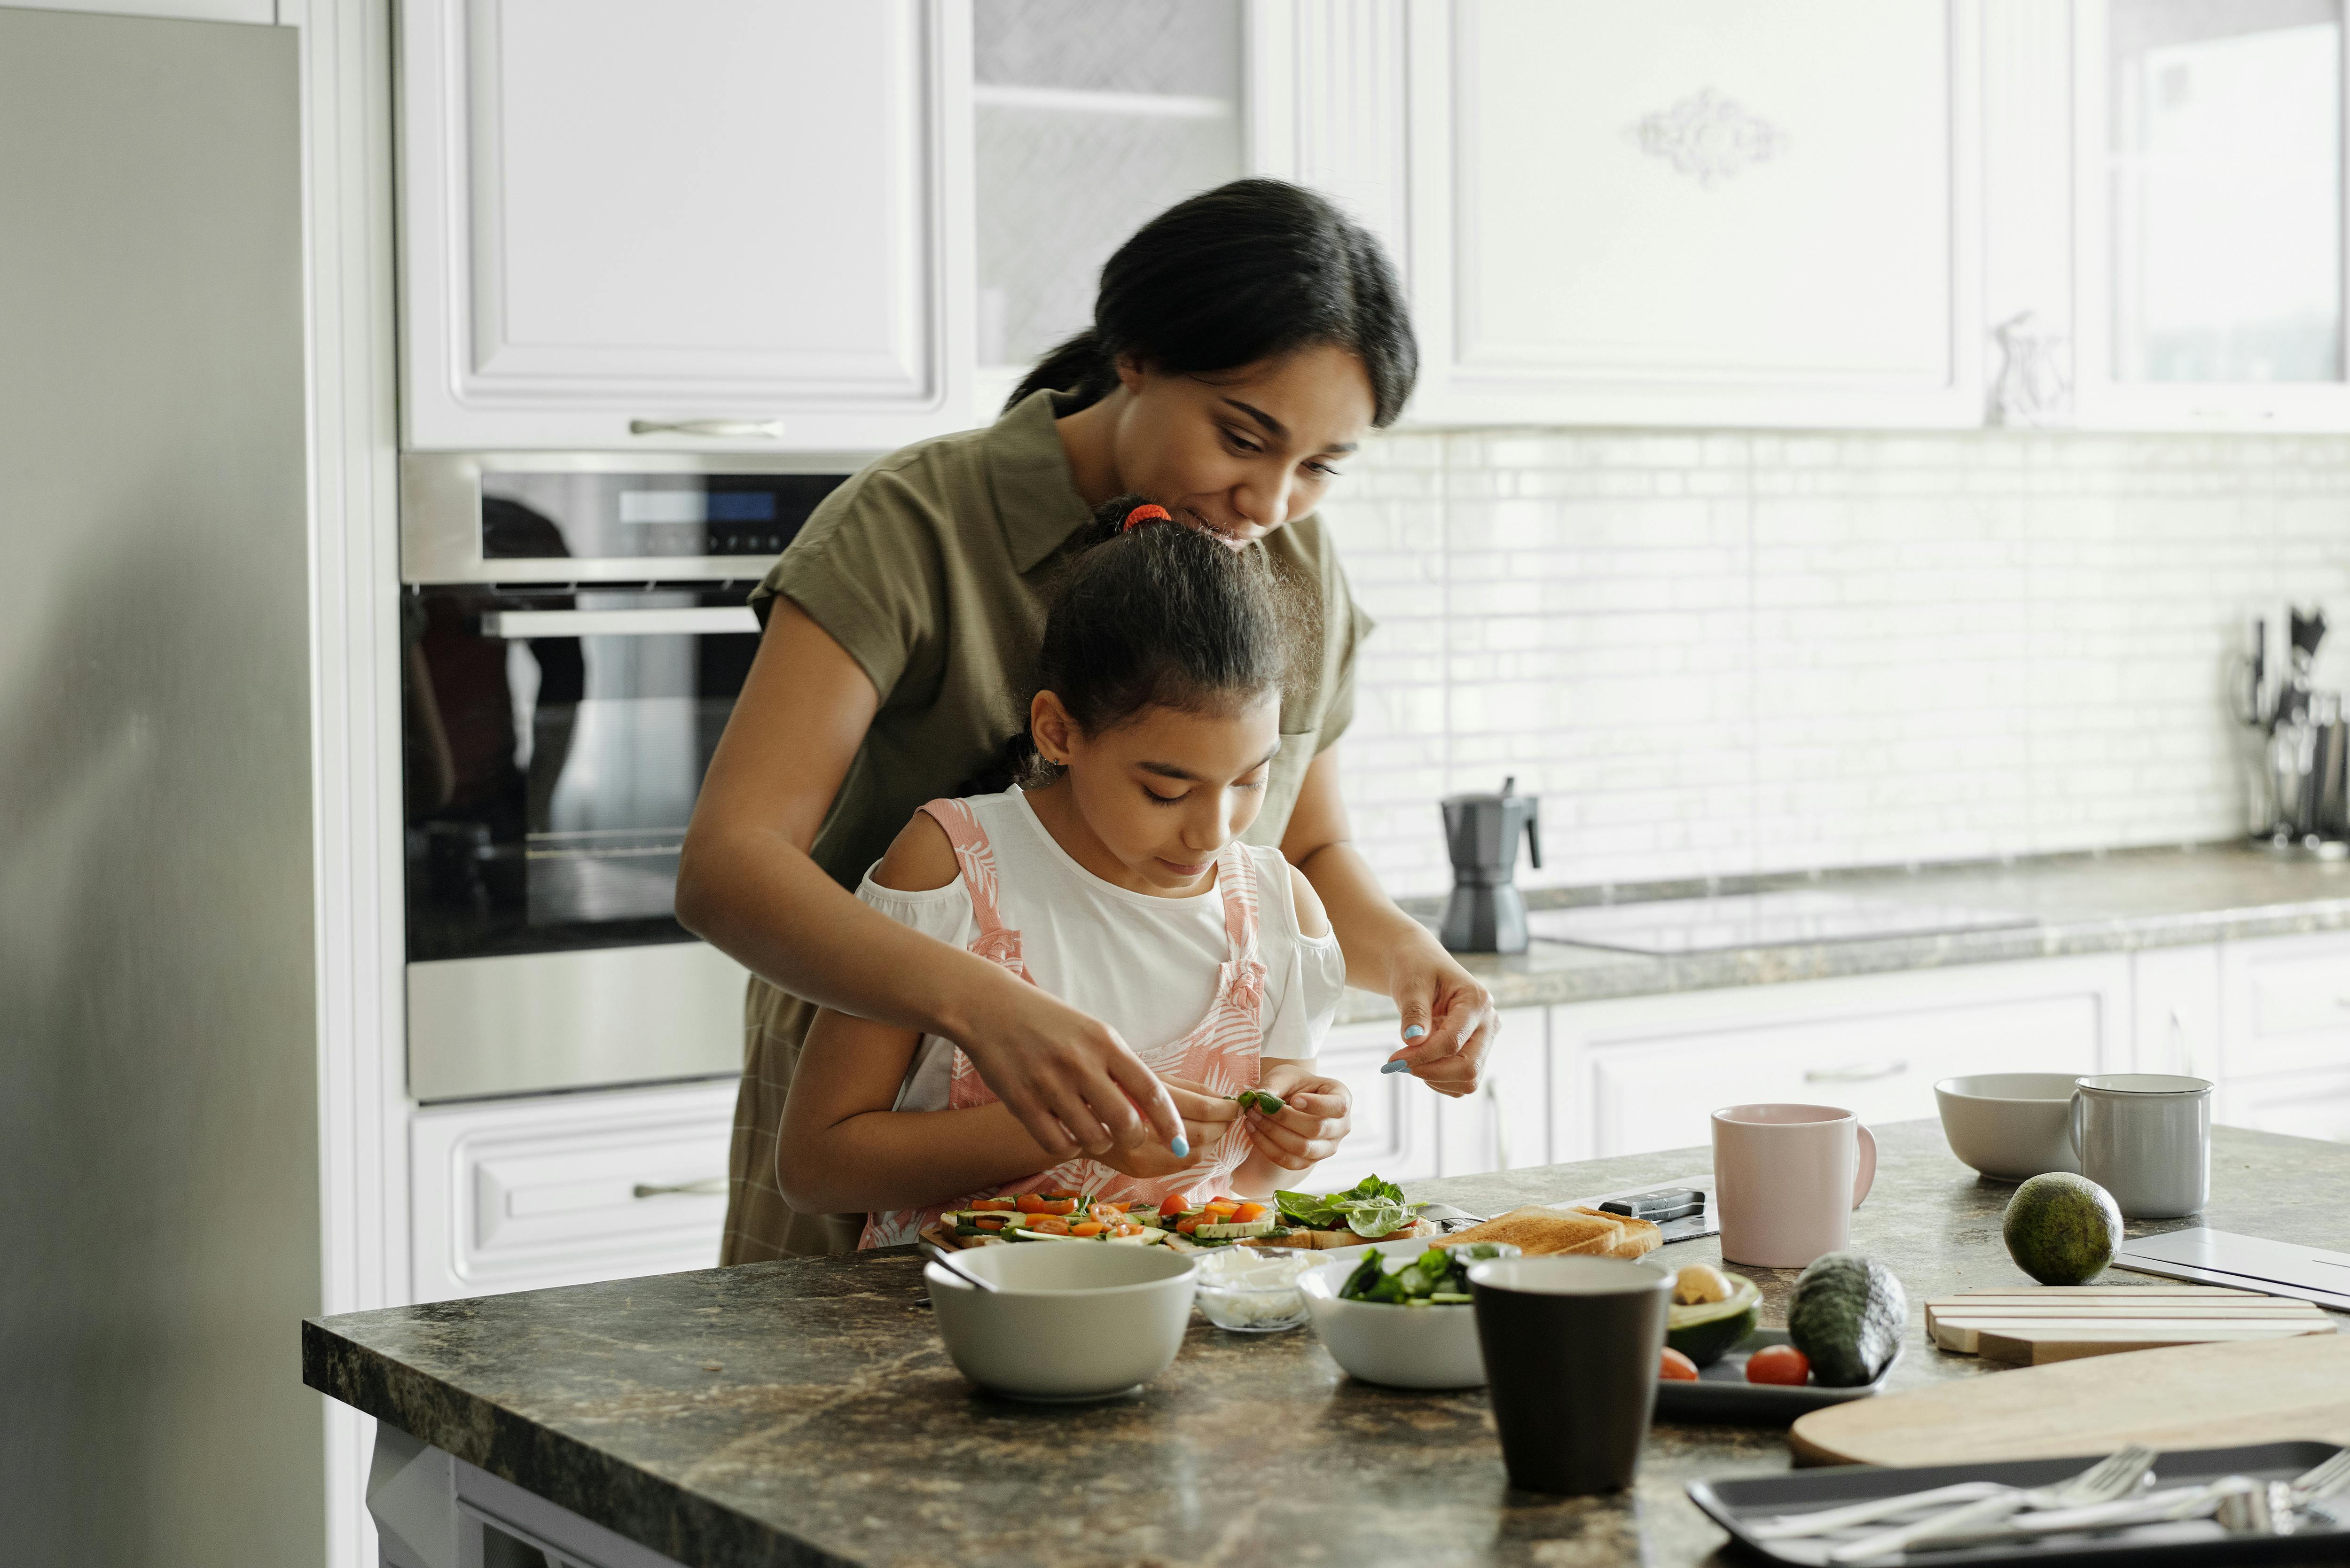 A little girl being taught how to cook by her mother | Source: Pexels